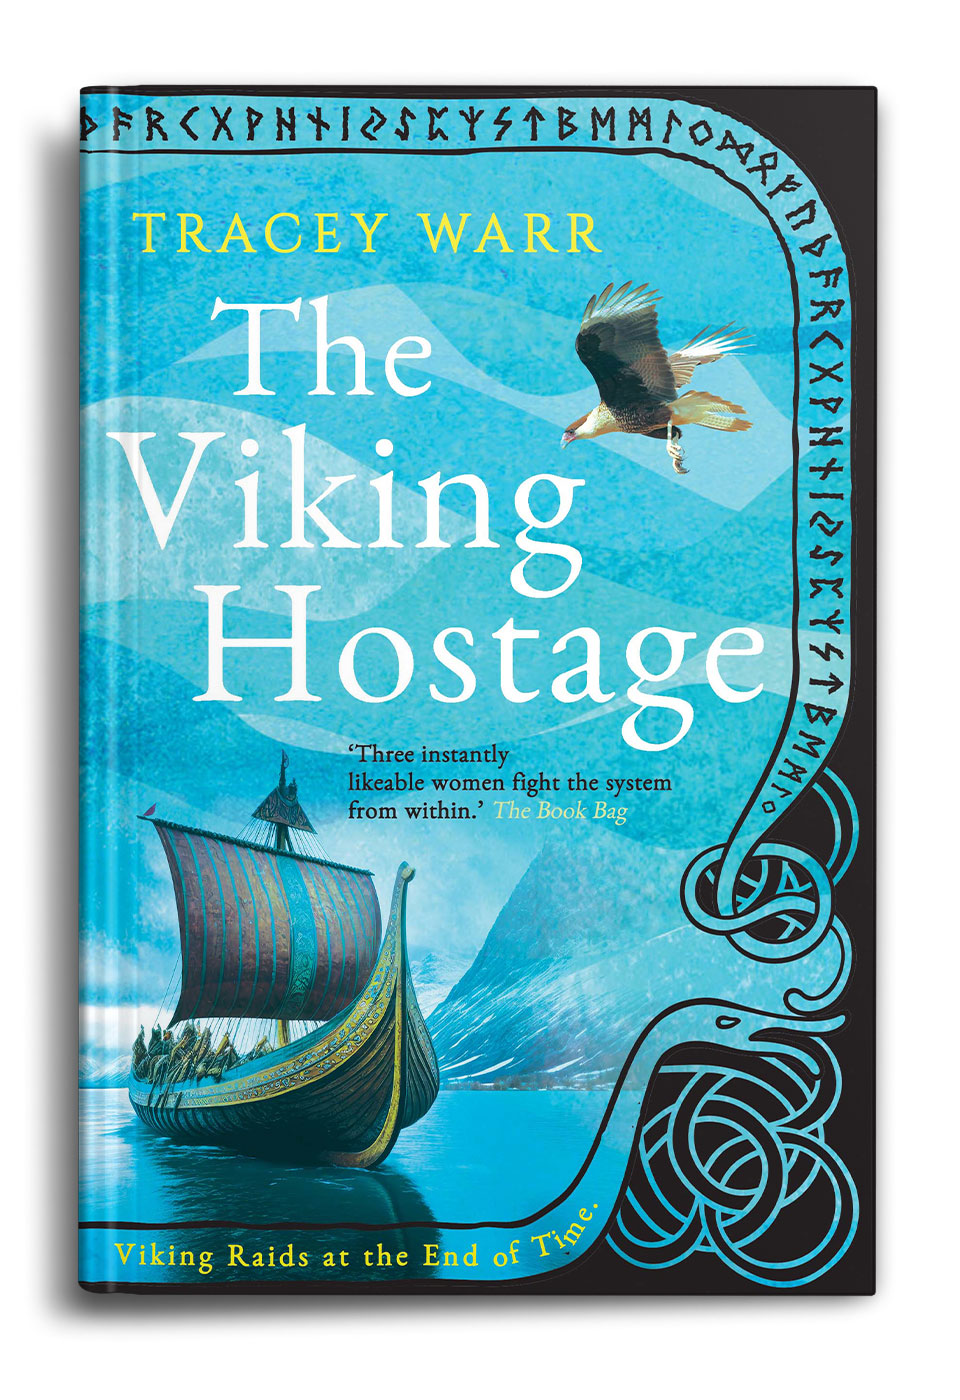 The-Viking-hostage-by-Tracey-Warr